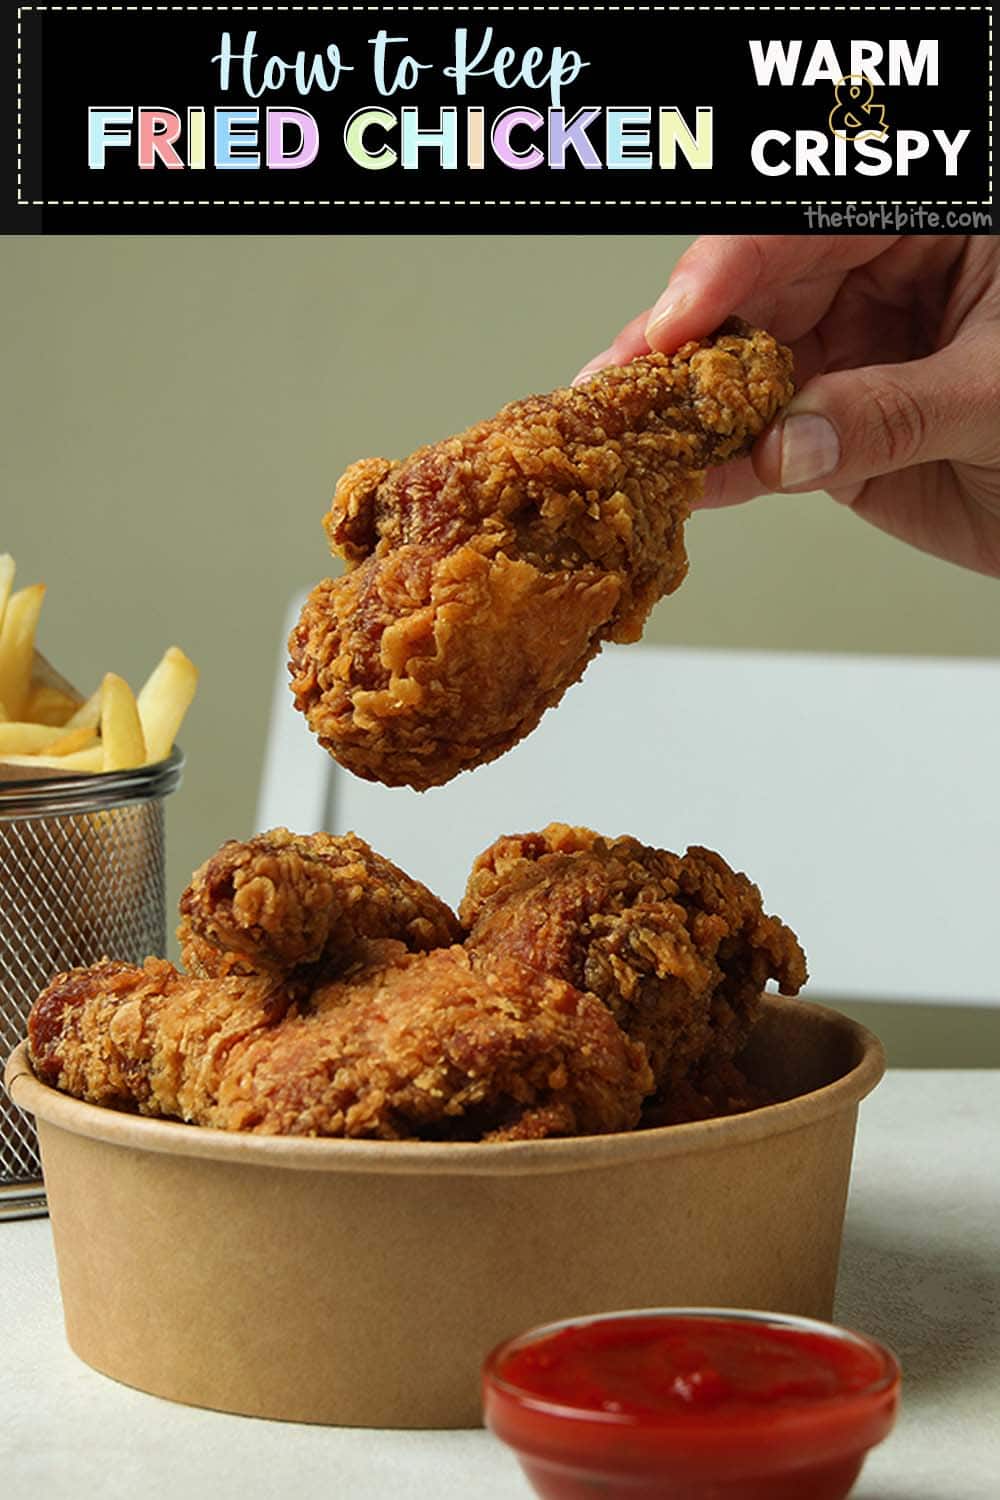 How to Keep Fried Chicken Warm and Crispy - The Fork Bite